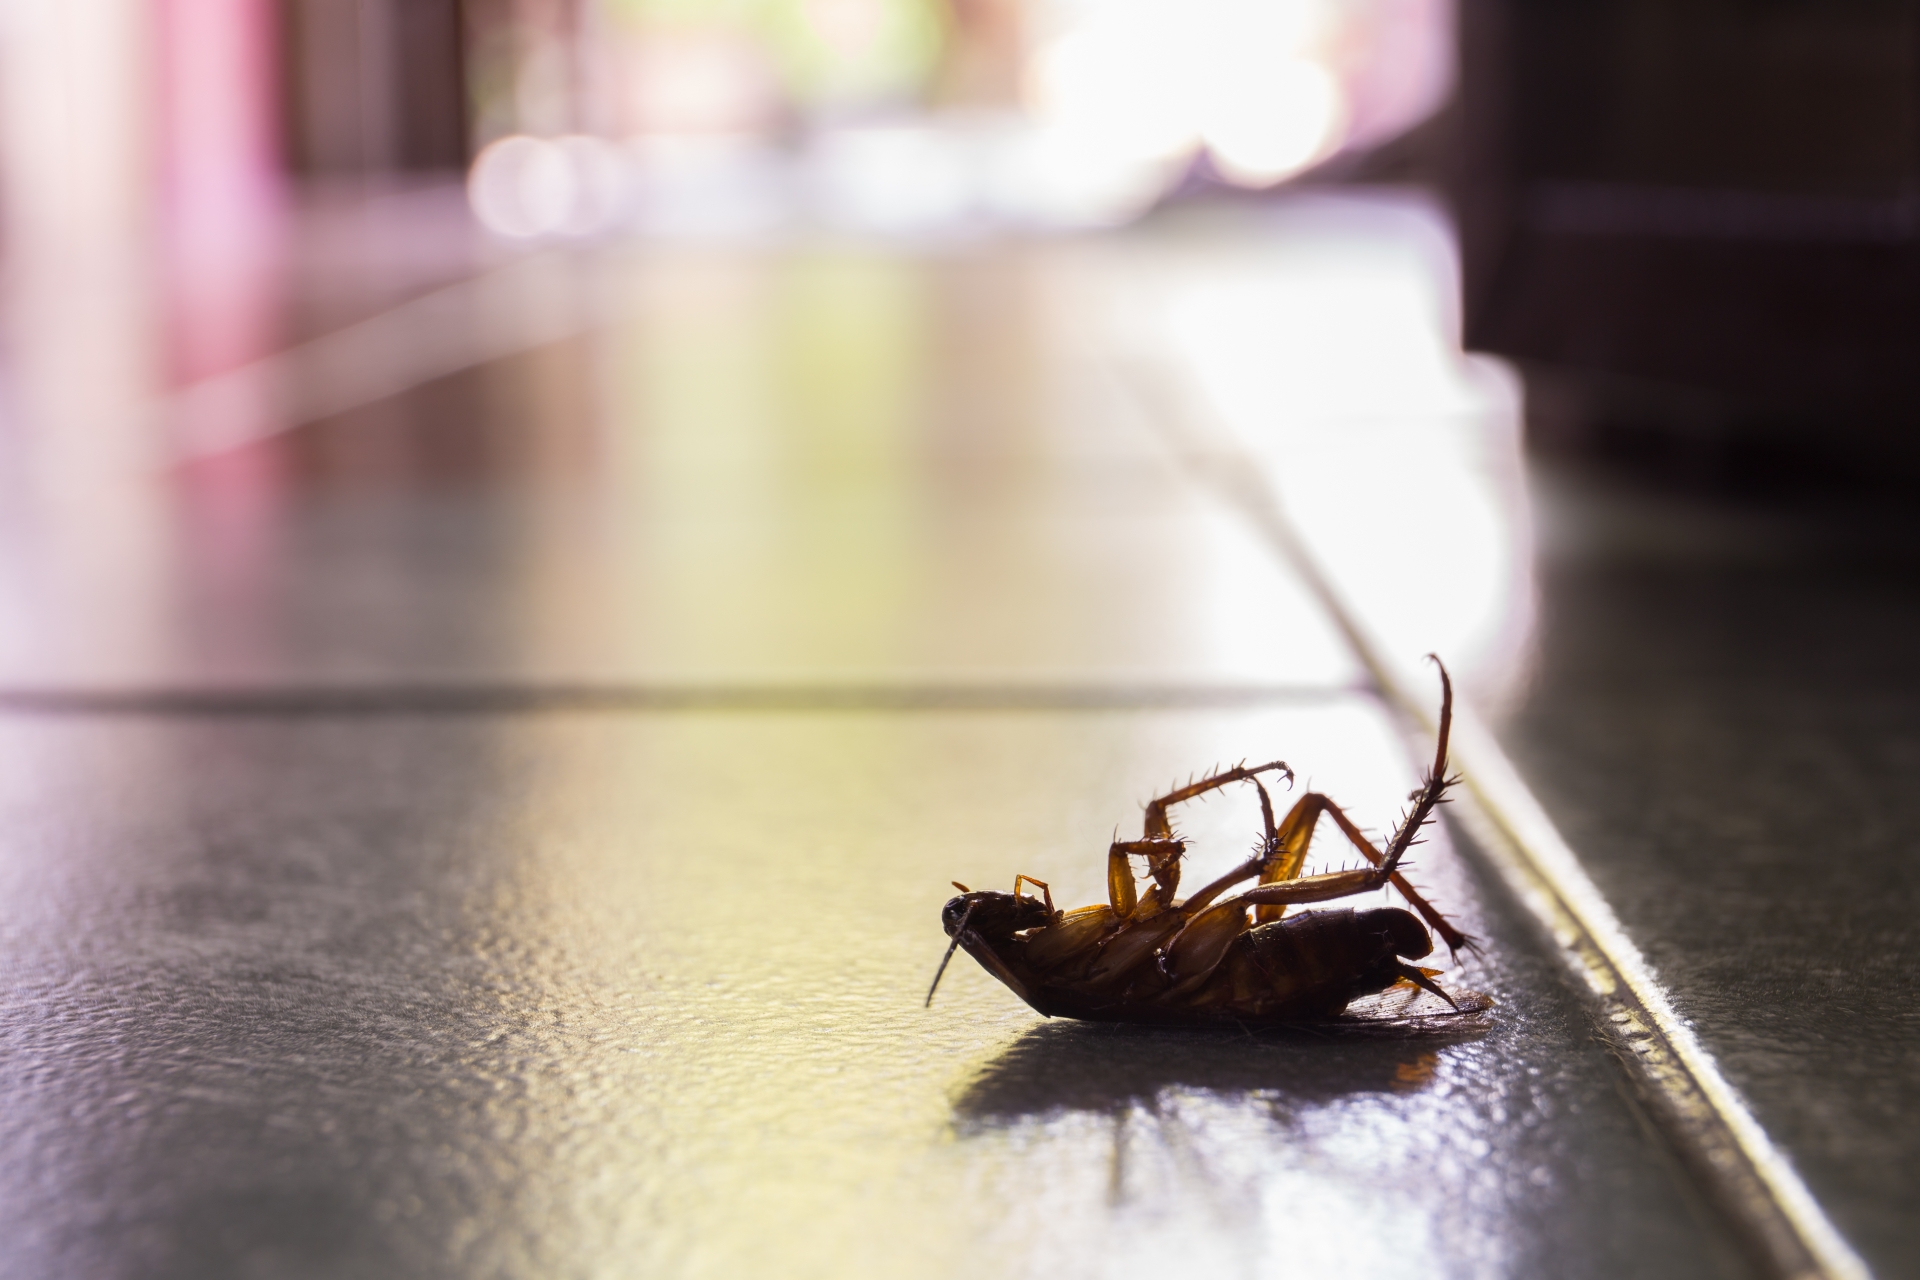 Cockroach Control, Pest Control in West Horsley, East Horsley, Effingham, KT24. Call Now 020 8166 9746